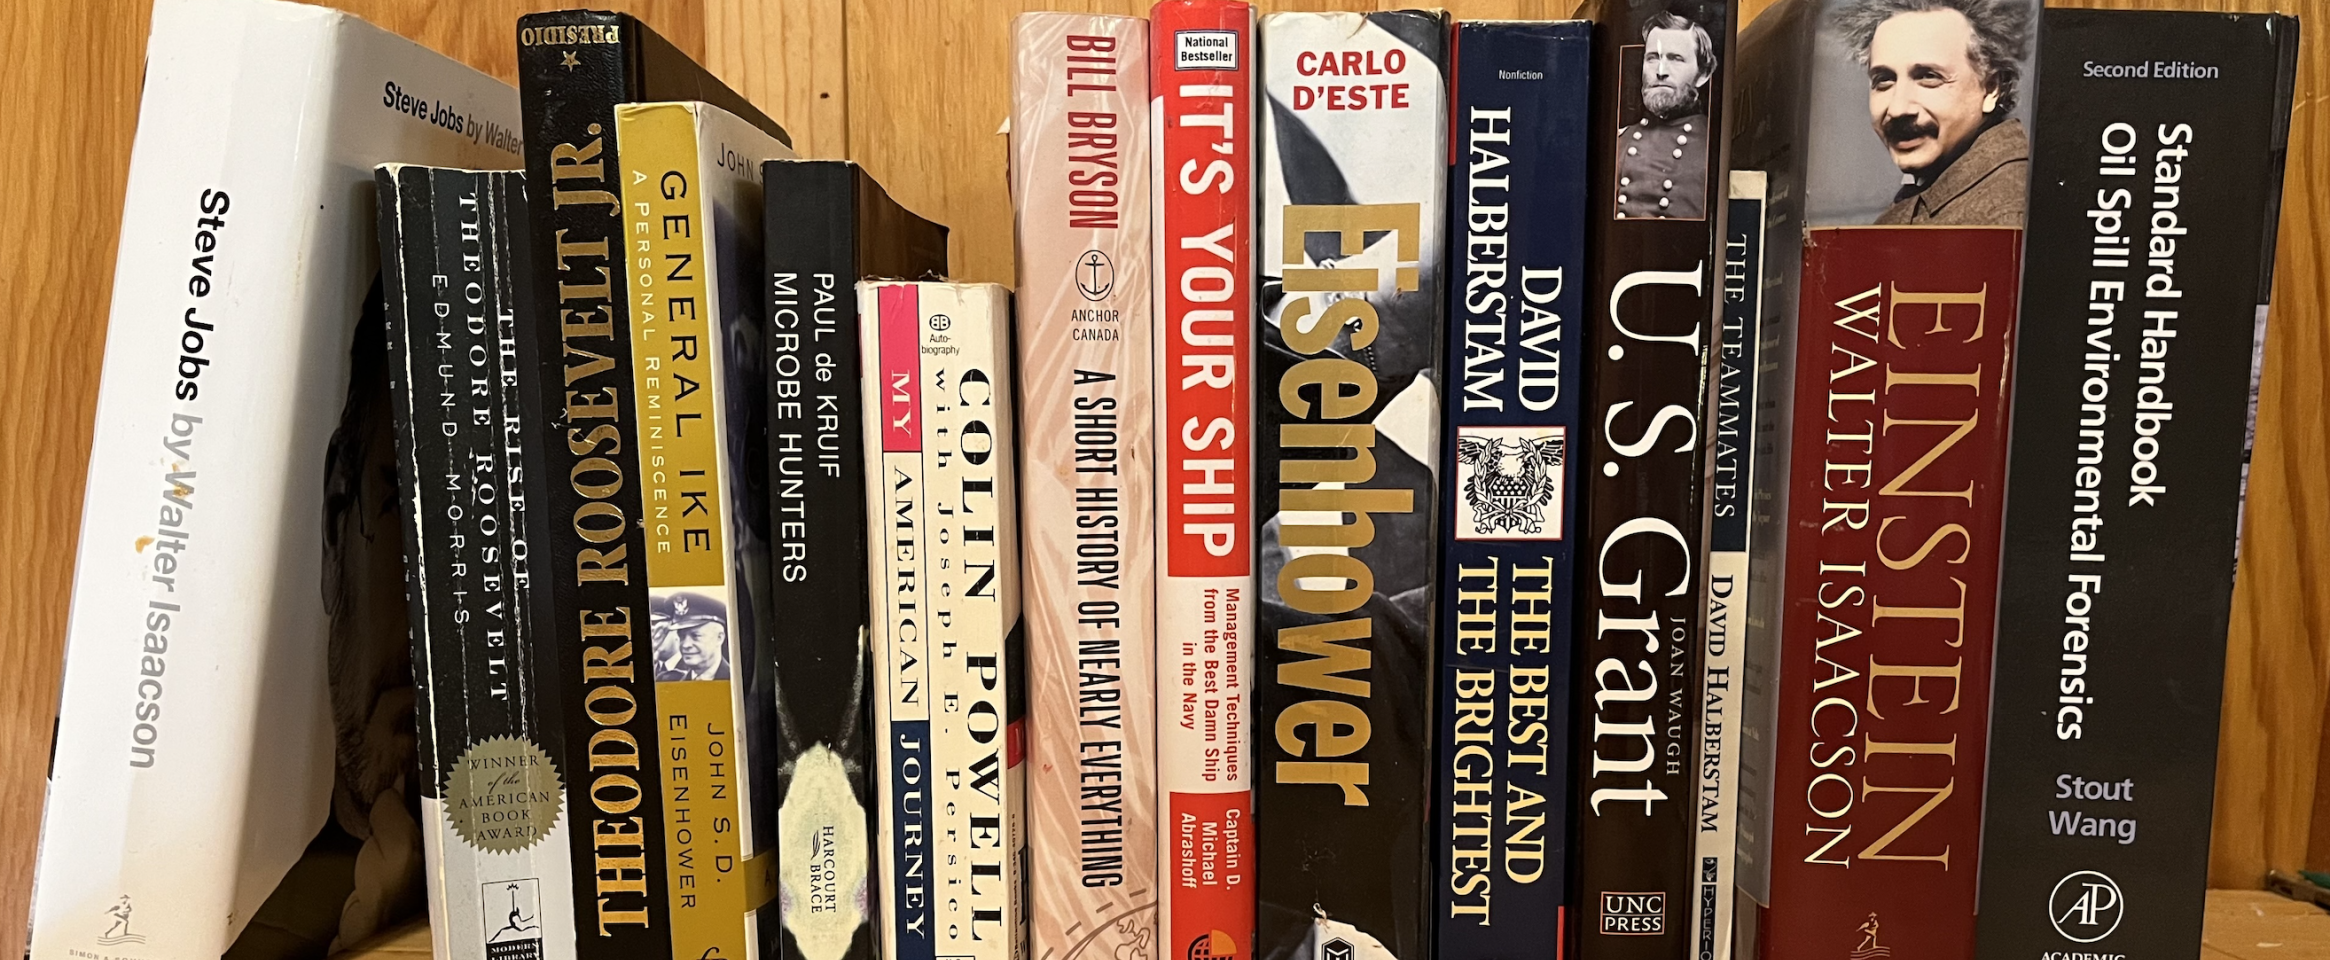 Rectangular photo of Christopher Reddy’s office bookshelf showing books on leadership and leaders, including U.S. Grant, Theodore Roosevelt, Albert Einstein, Dwight Eisenhower, and Steve Jobs. Photo credit: Christopher Reddy 